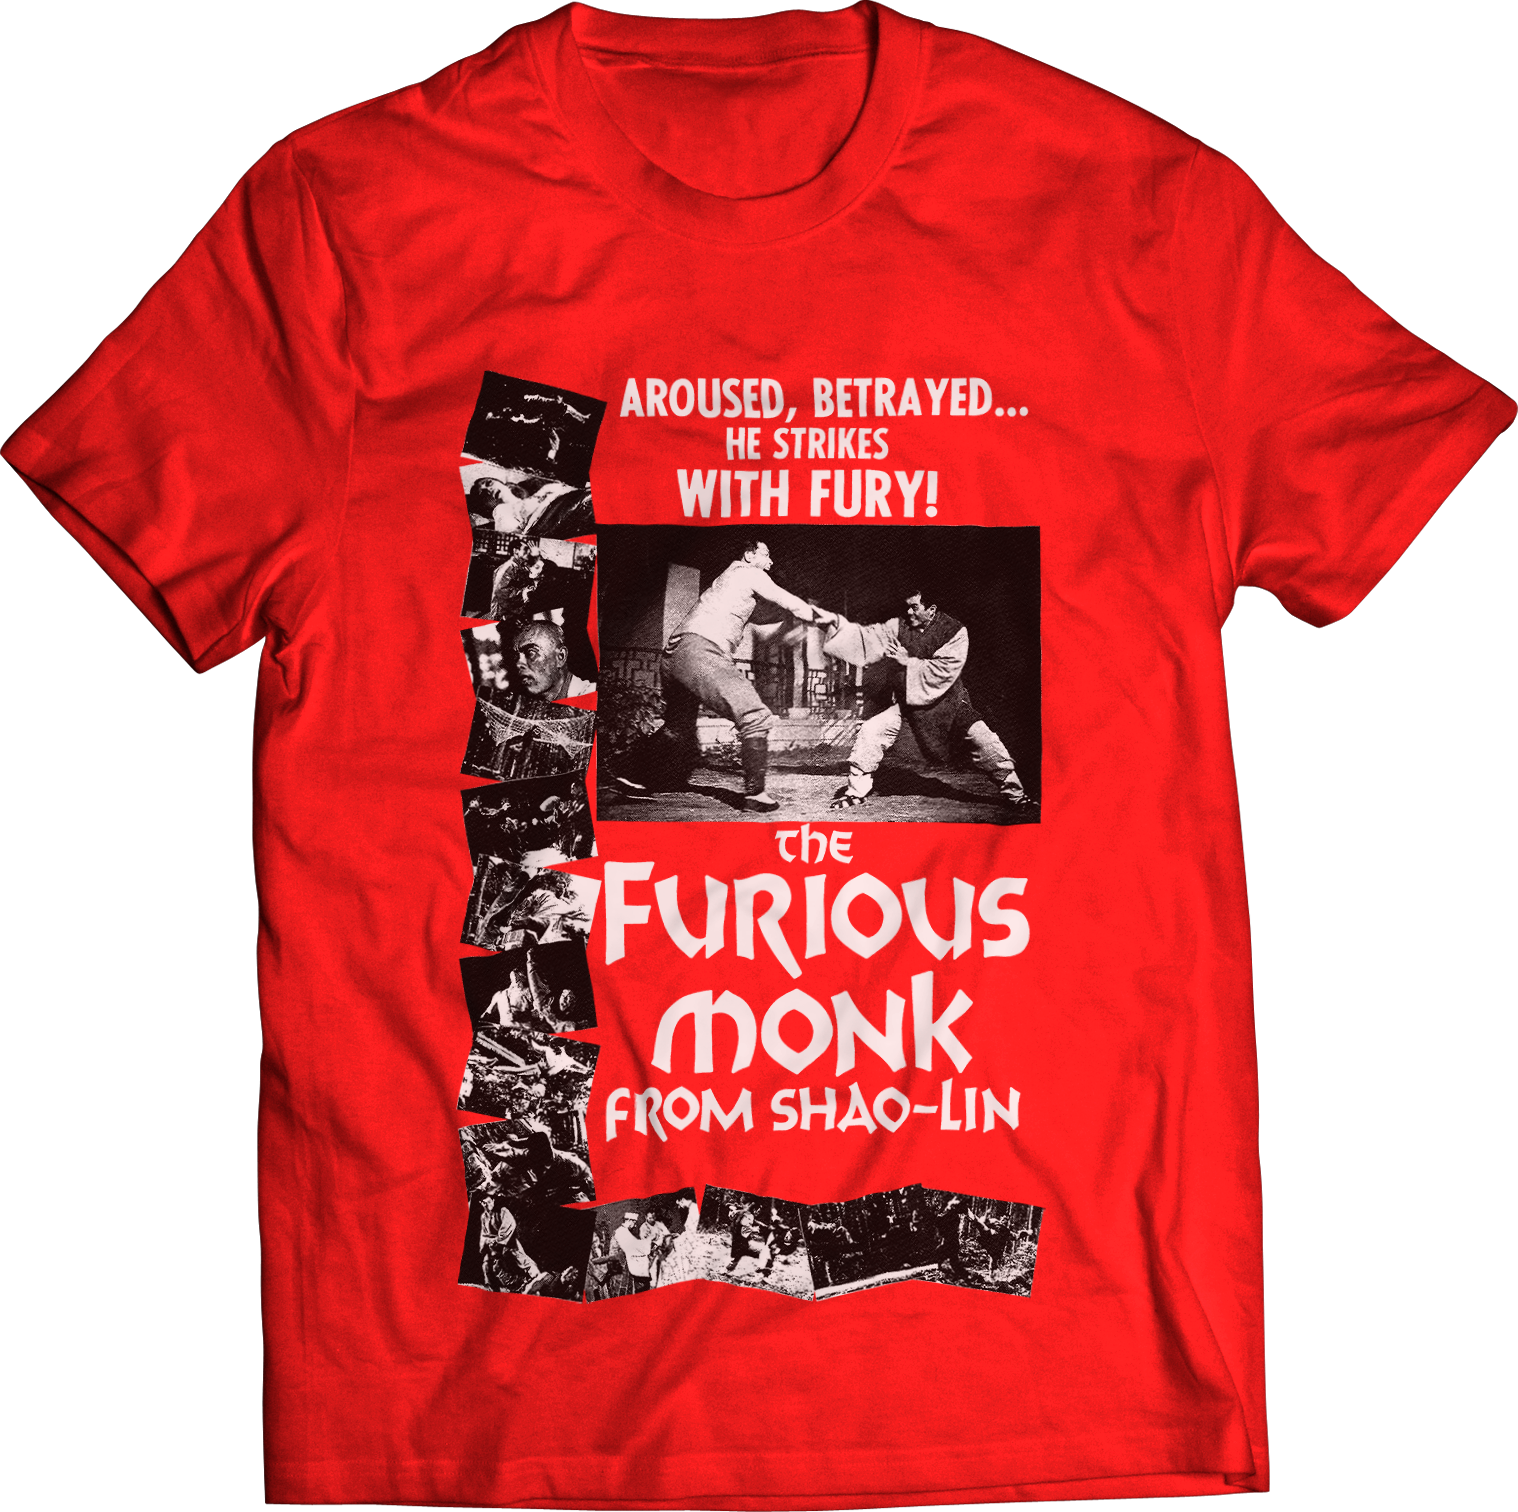 ATOM AGE "THE FURIOUS MONK FROM SHAO-LIN" T-SHIRT